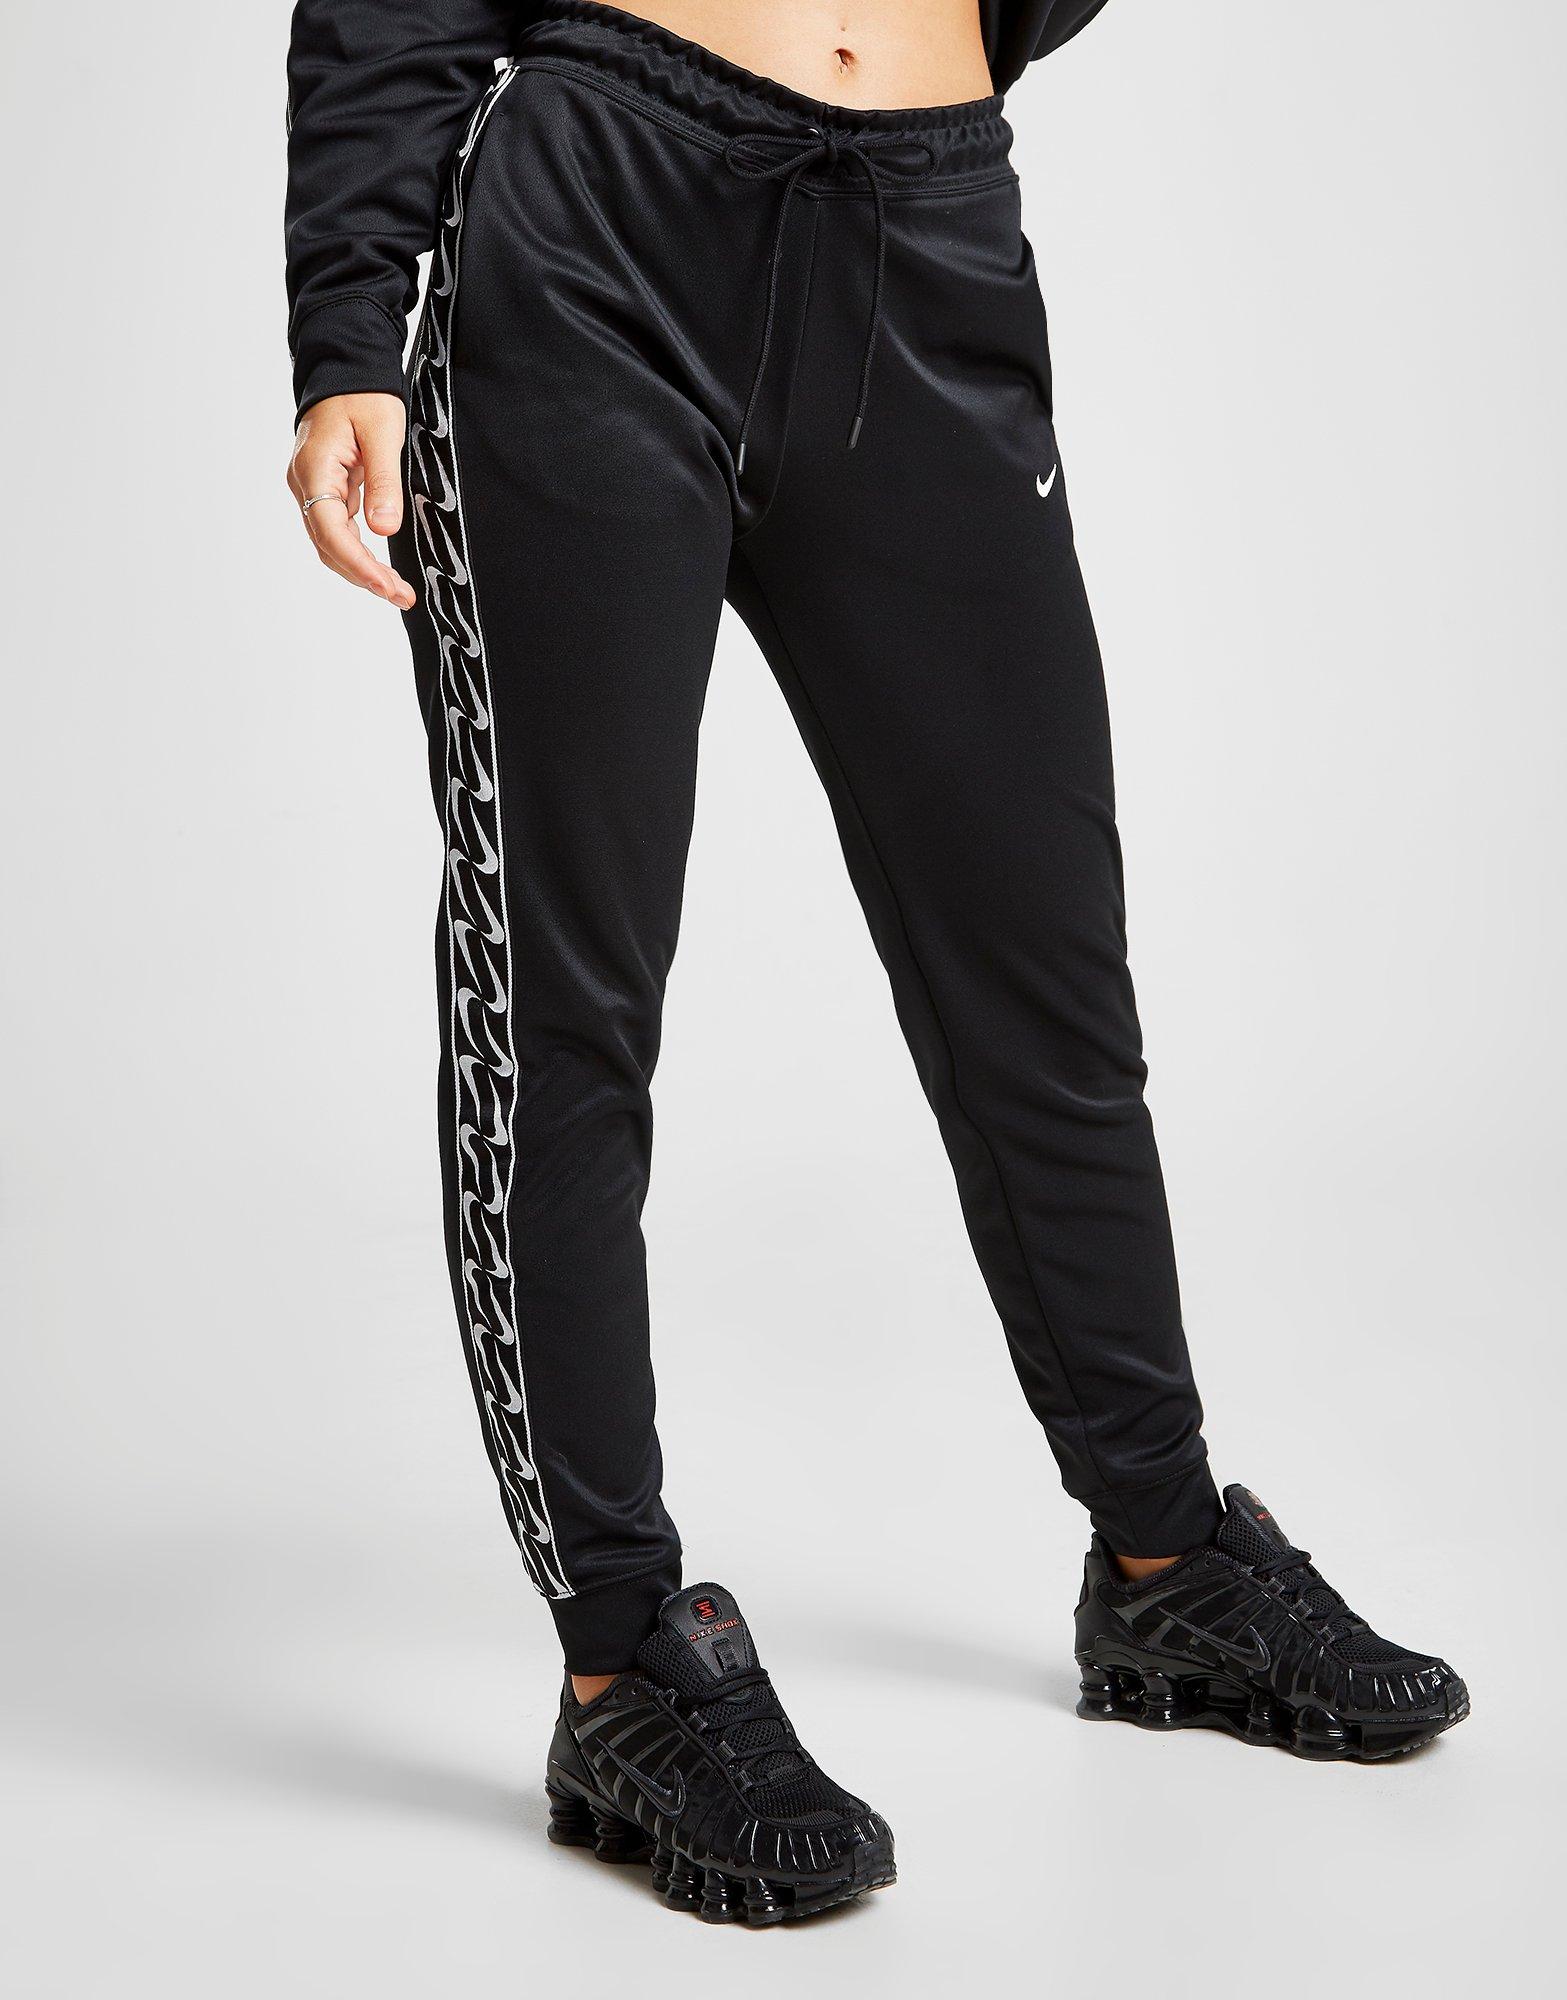 nike taped poly pants black cheapest 